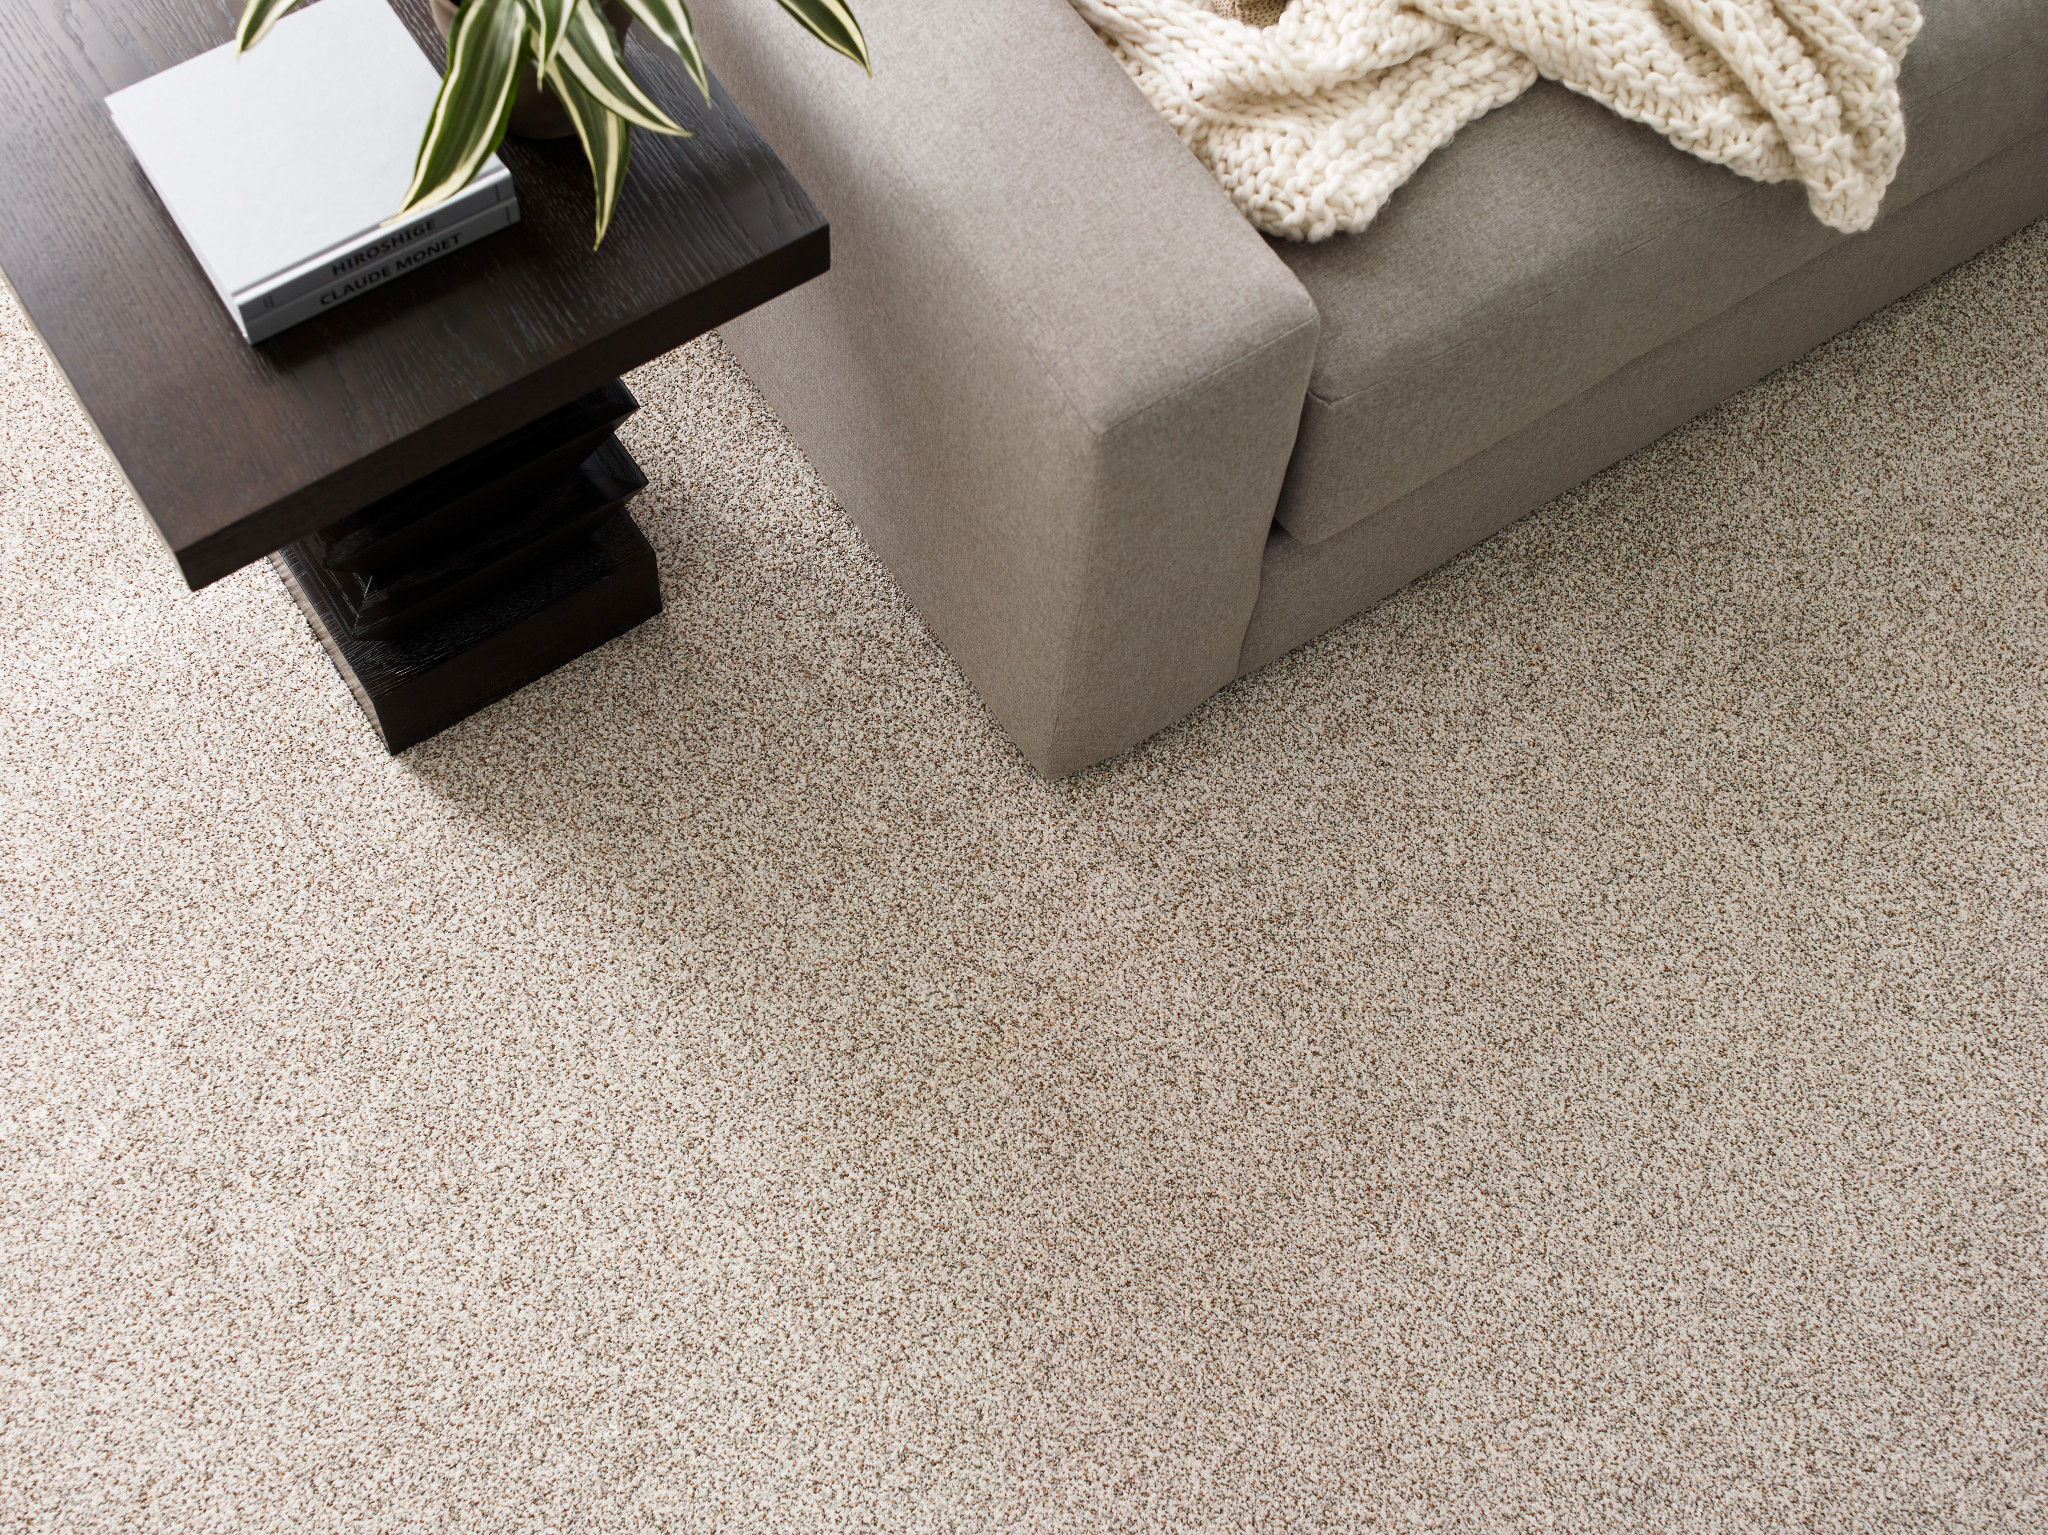 Factors to Consider When Choosing a Carpet In Cañon City, CO